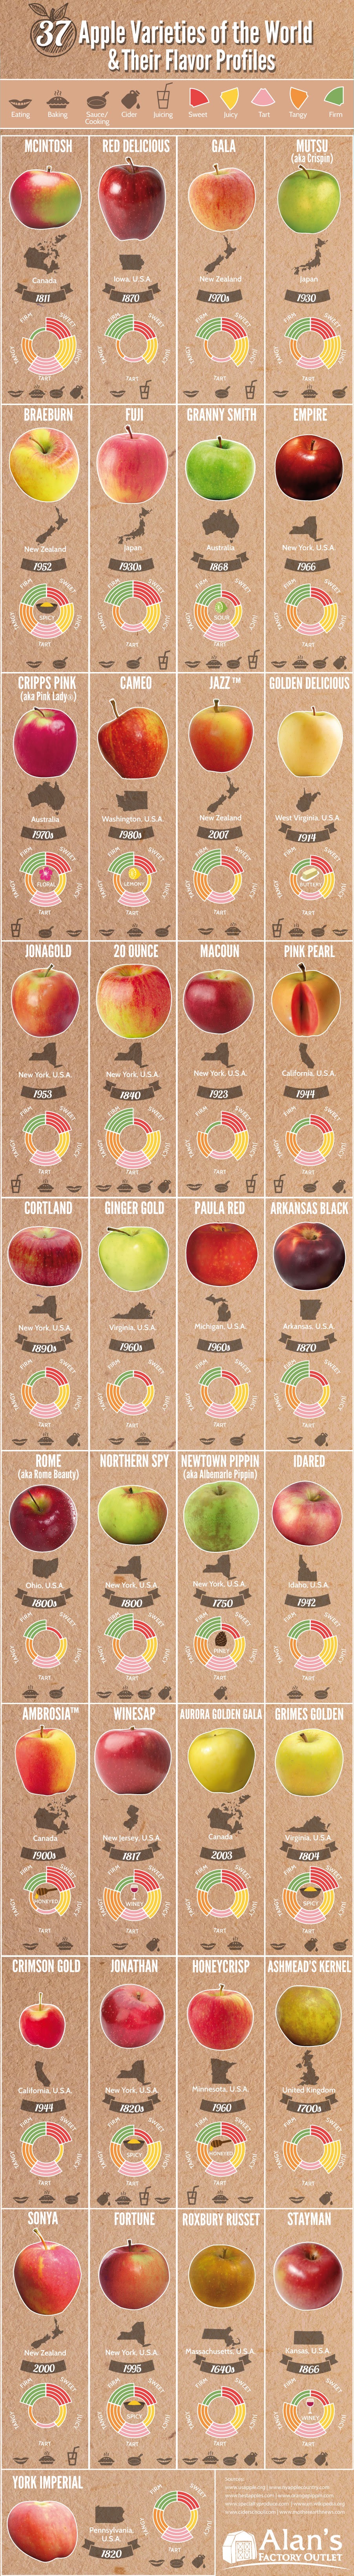 37 Apple Varieties Around the World and Their Flavor Profiles